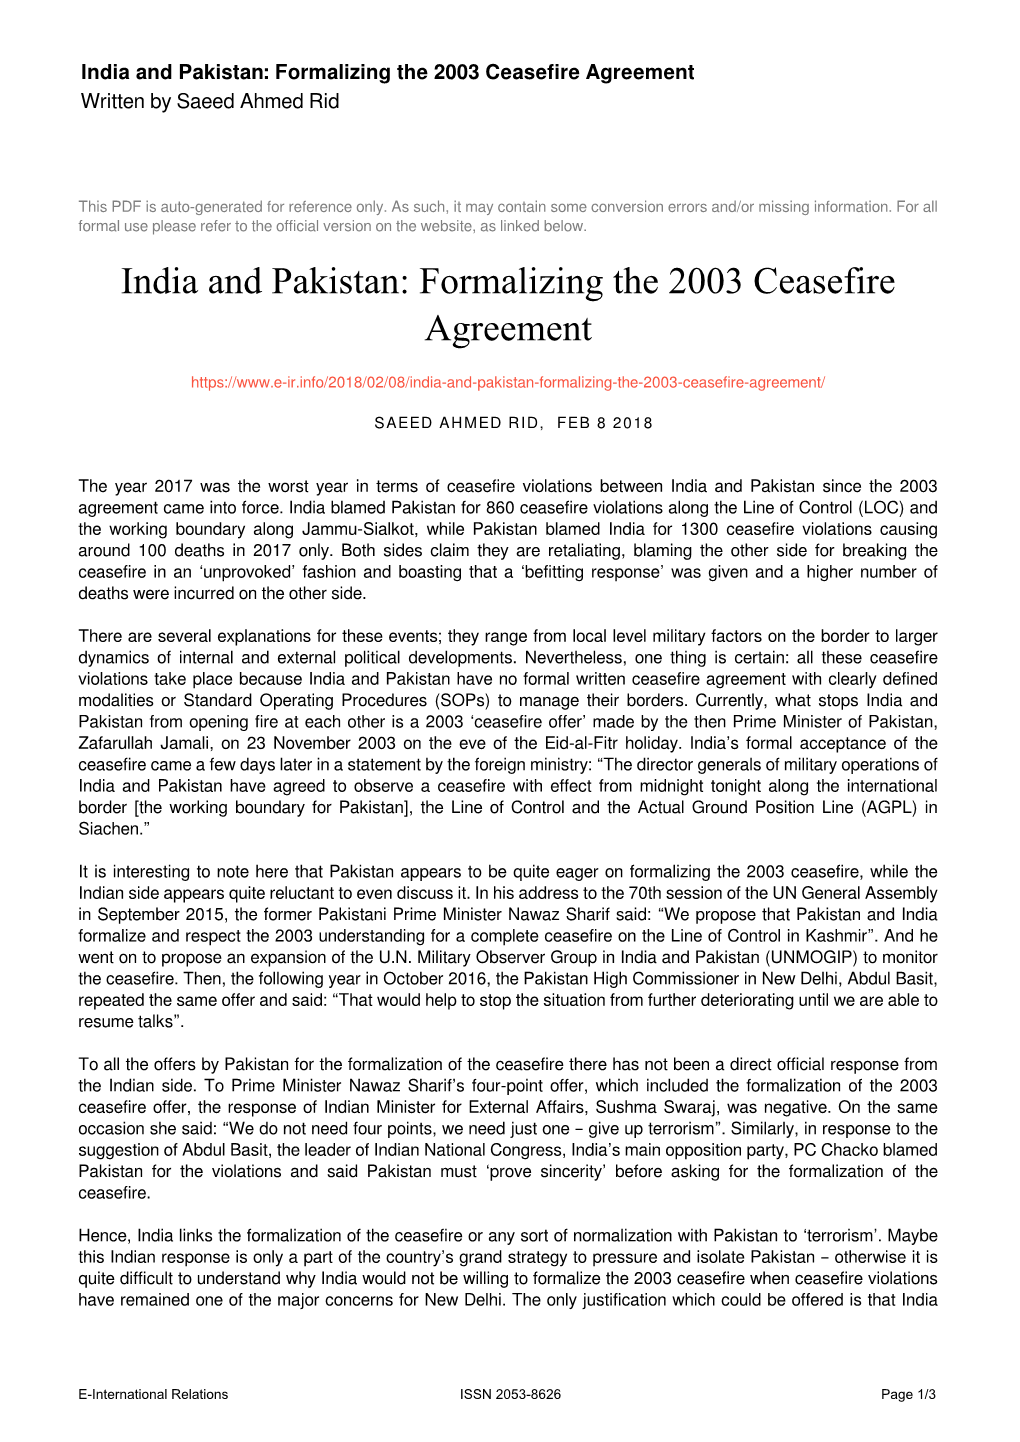 India and Pakistan: Formalizing the 2003 Ceasefire Agreement Written by Saeed Ahmed Rid